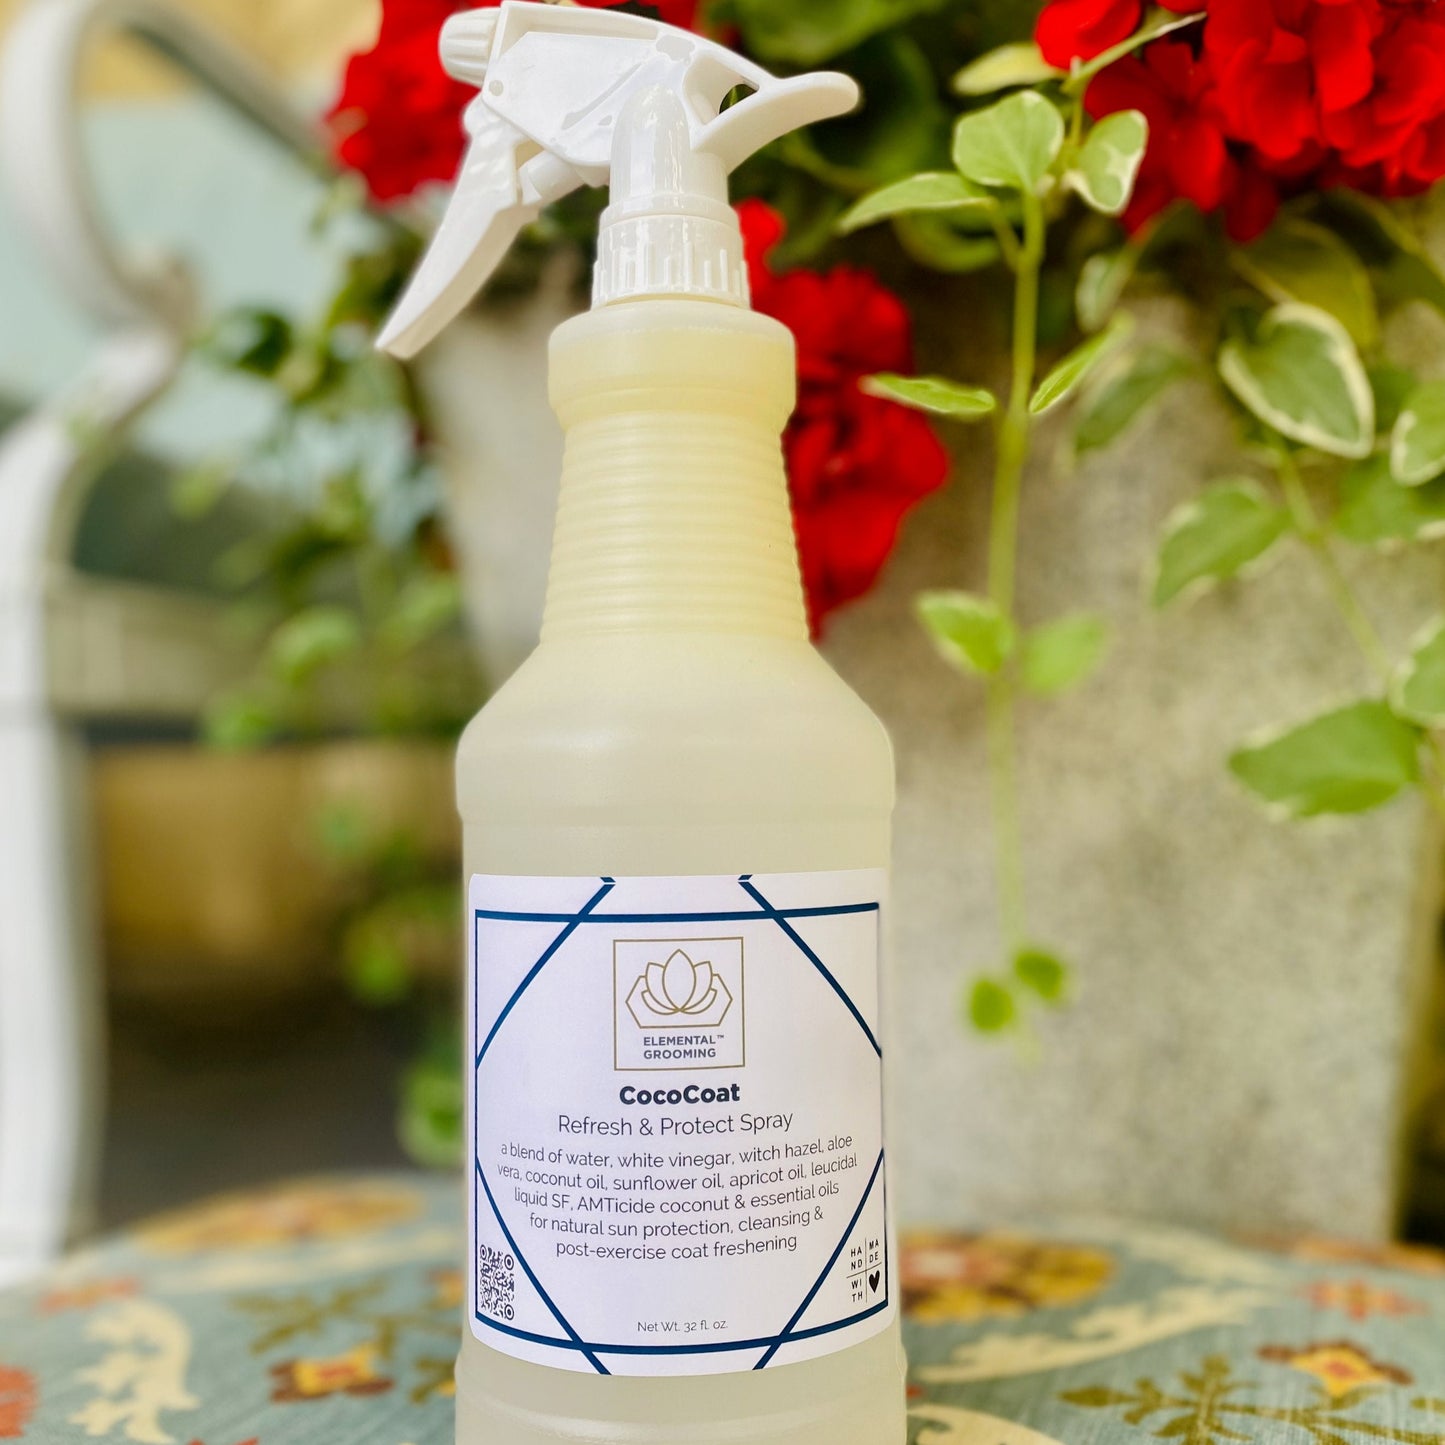 CocoCoat Refresh & Protect Spray